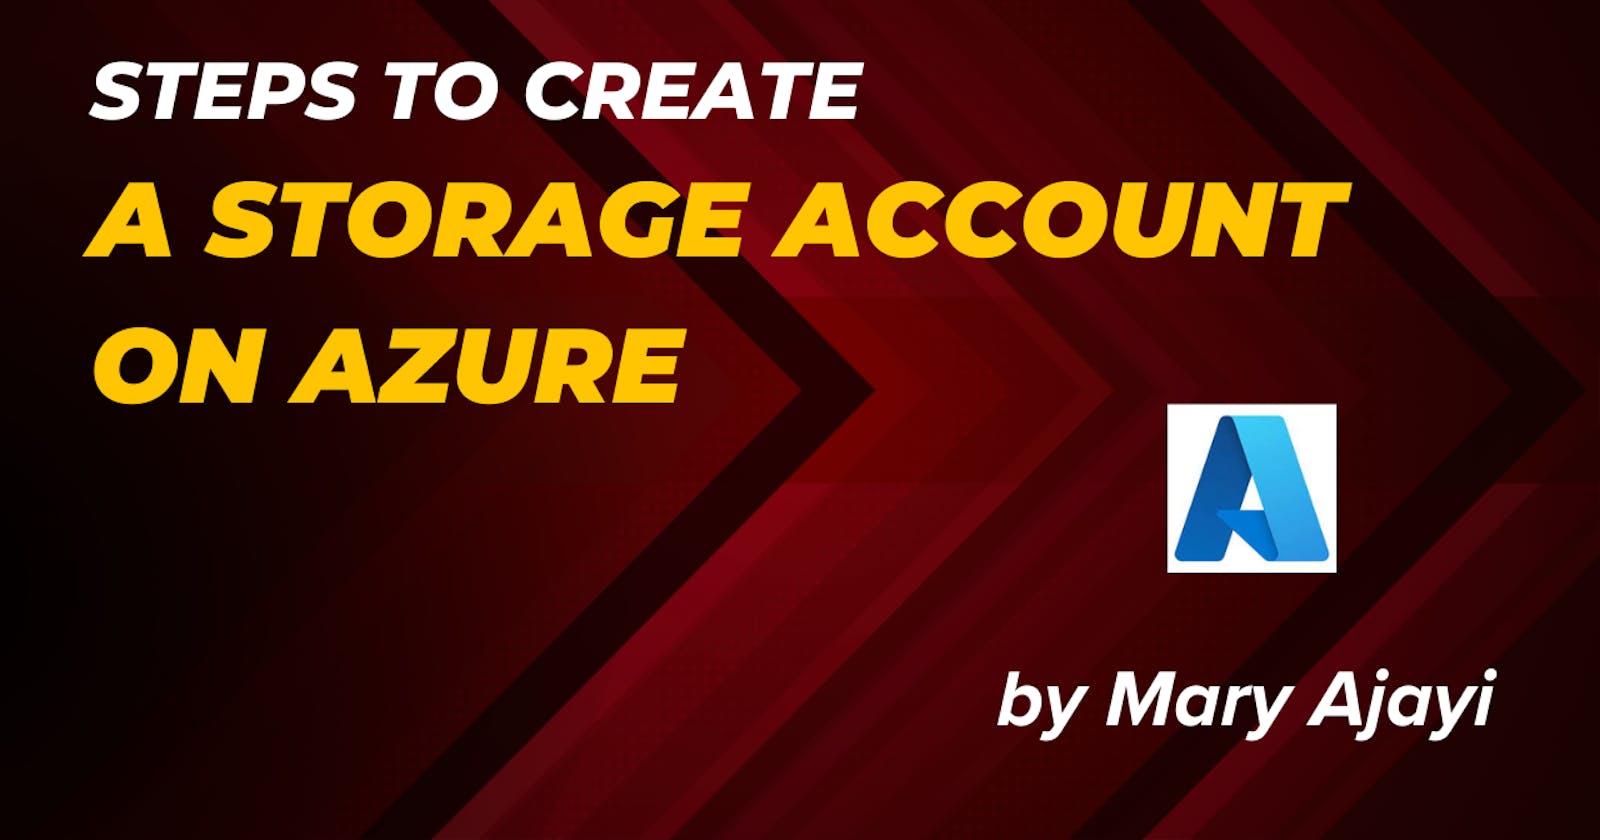 Steps to Create a Storage Account on Azure